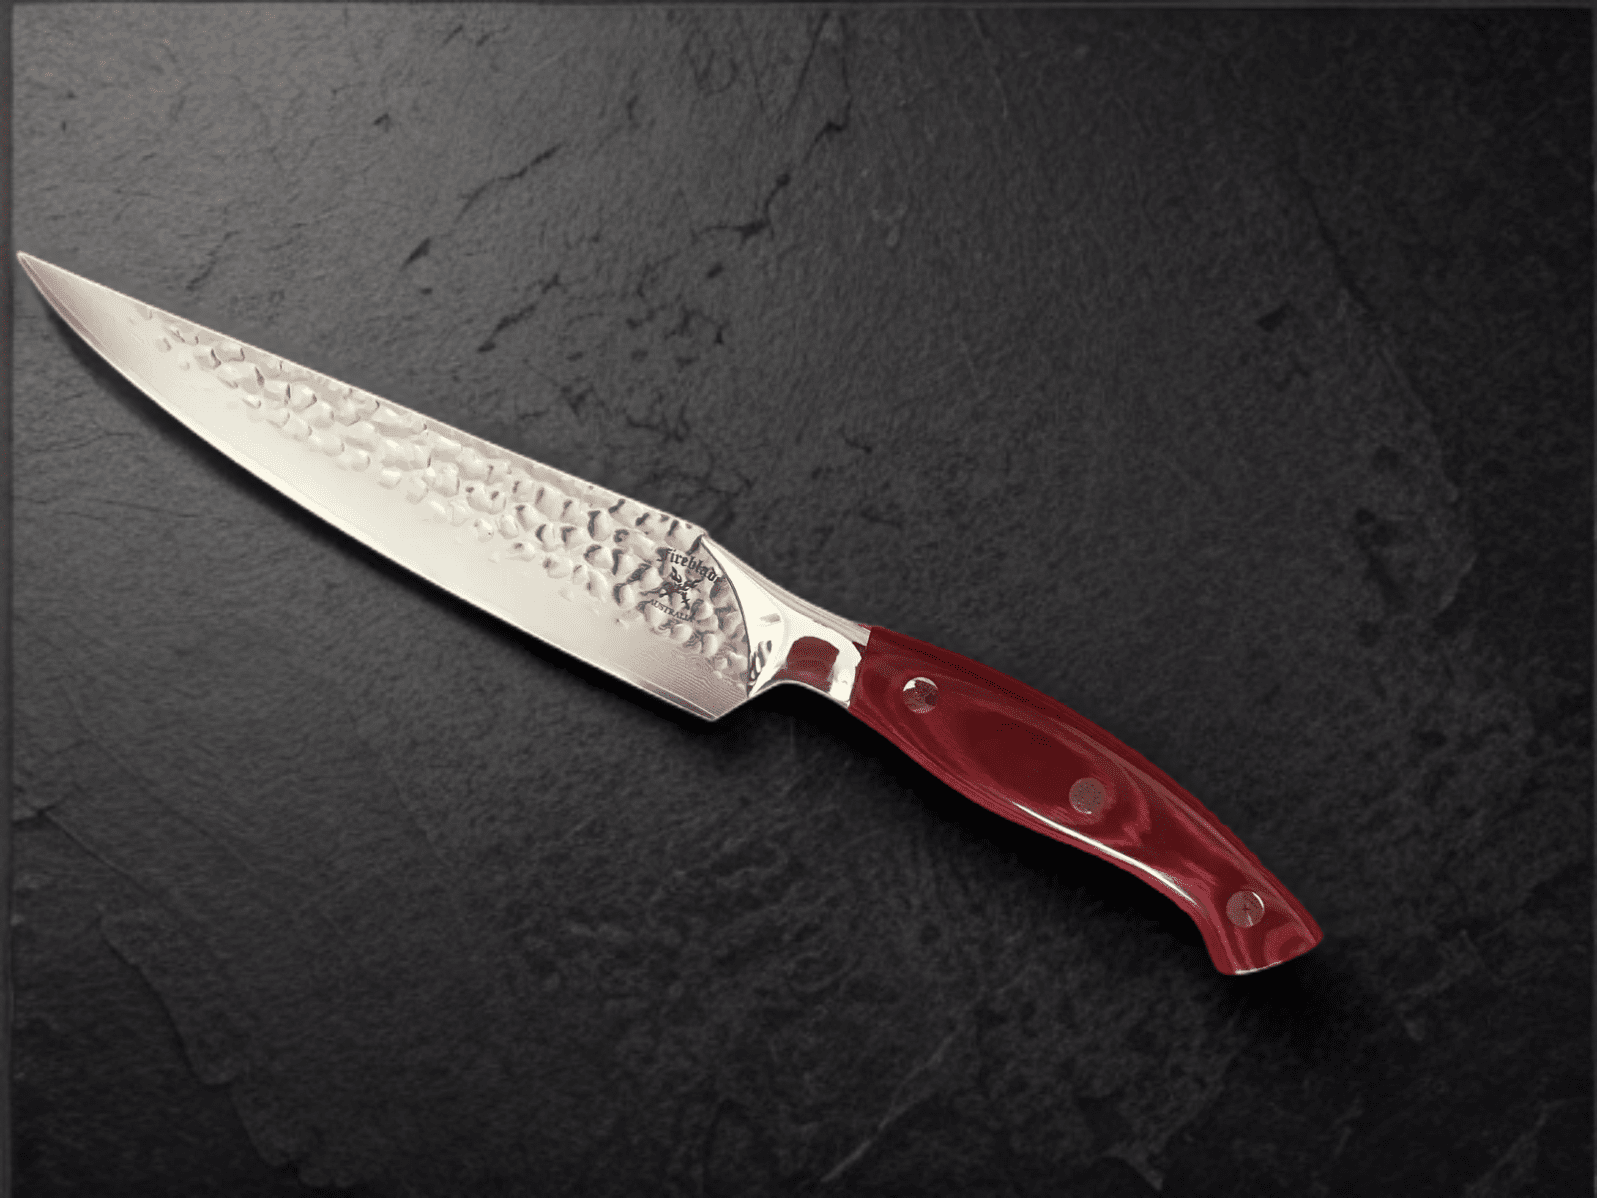 8 inch 67 Layer Damascus Steel Carving/Slicing Knife